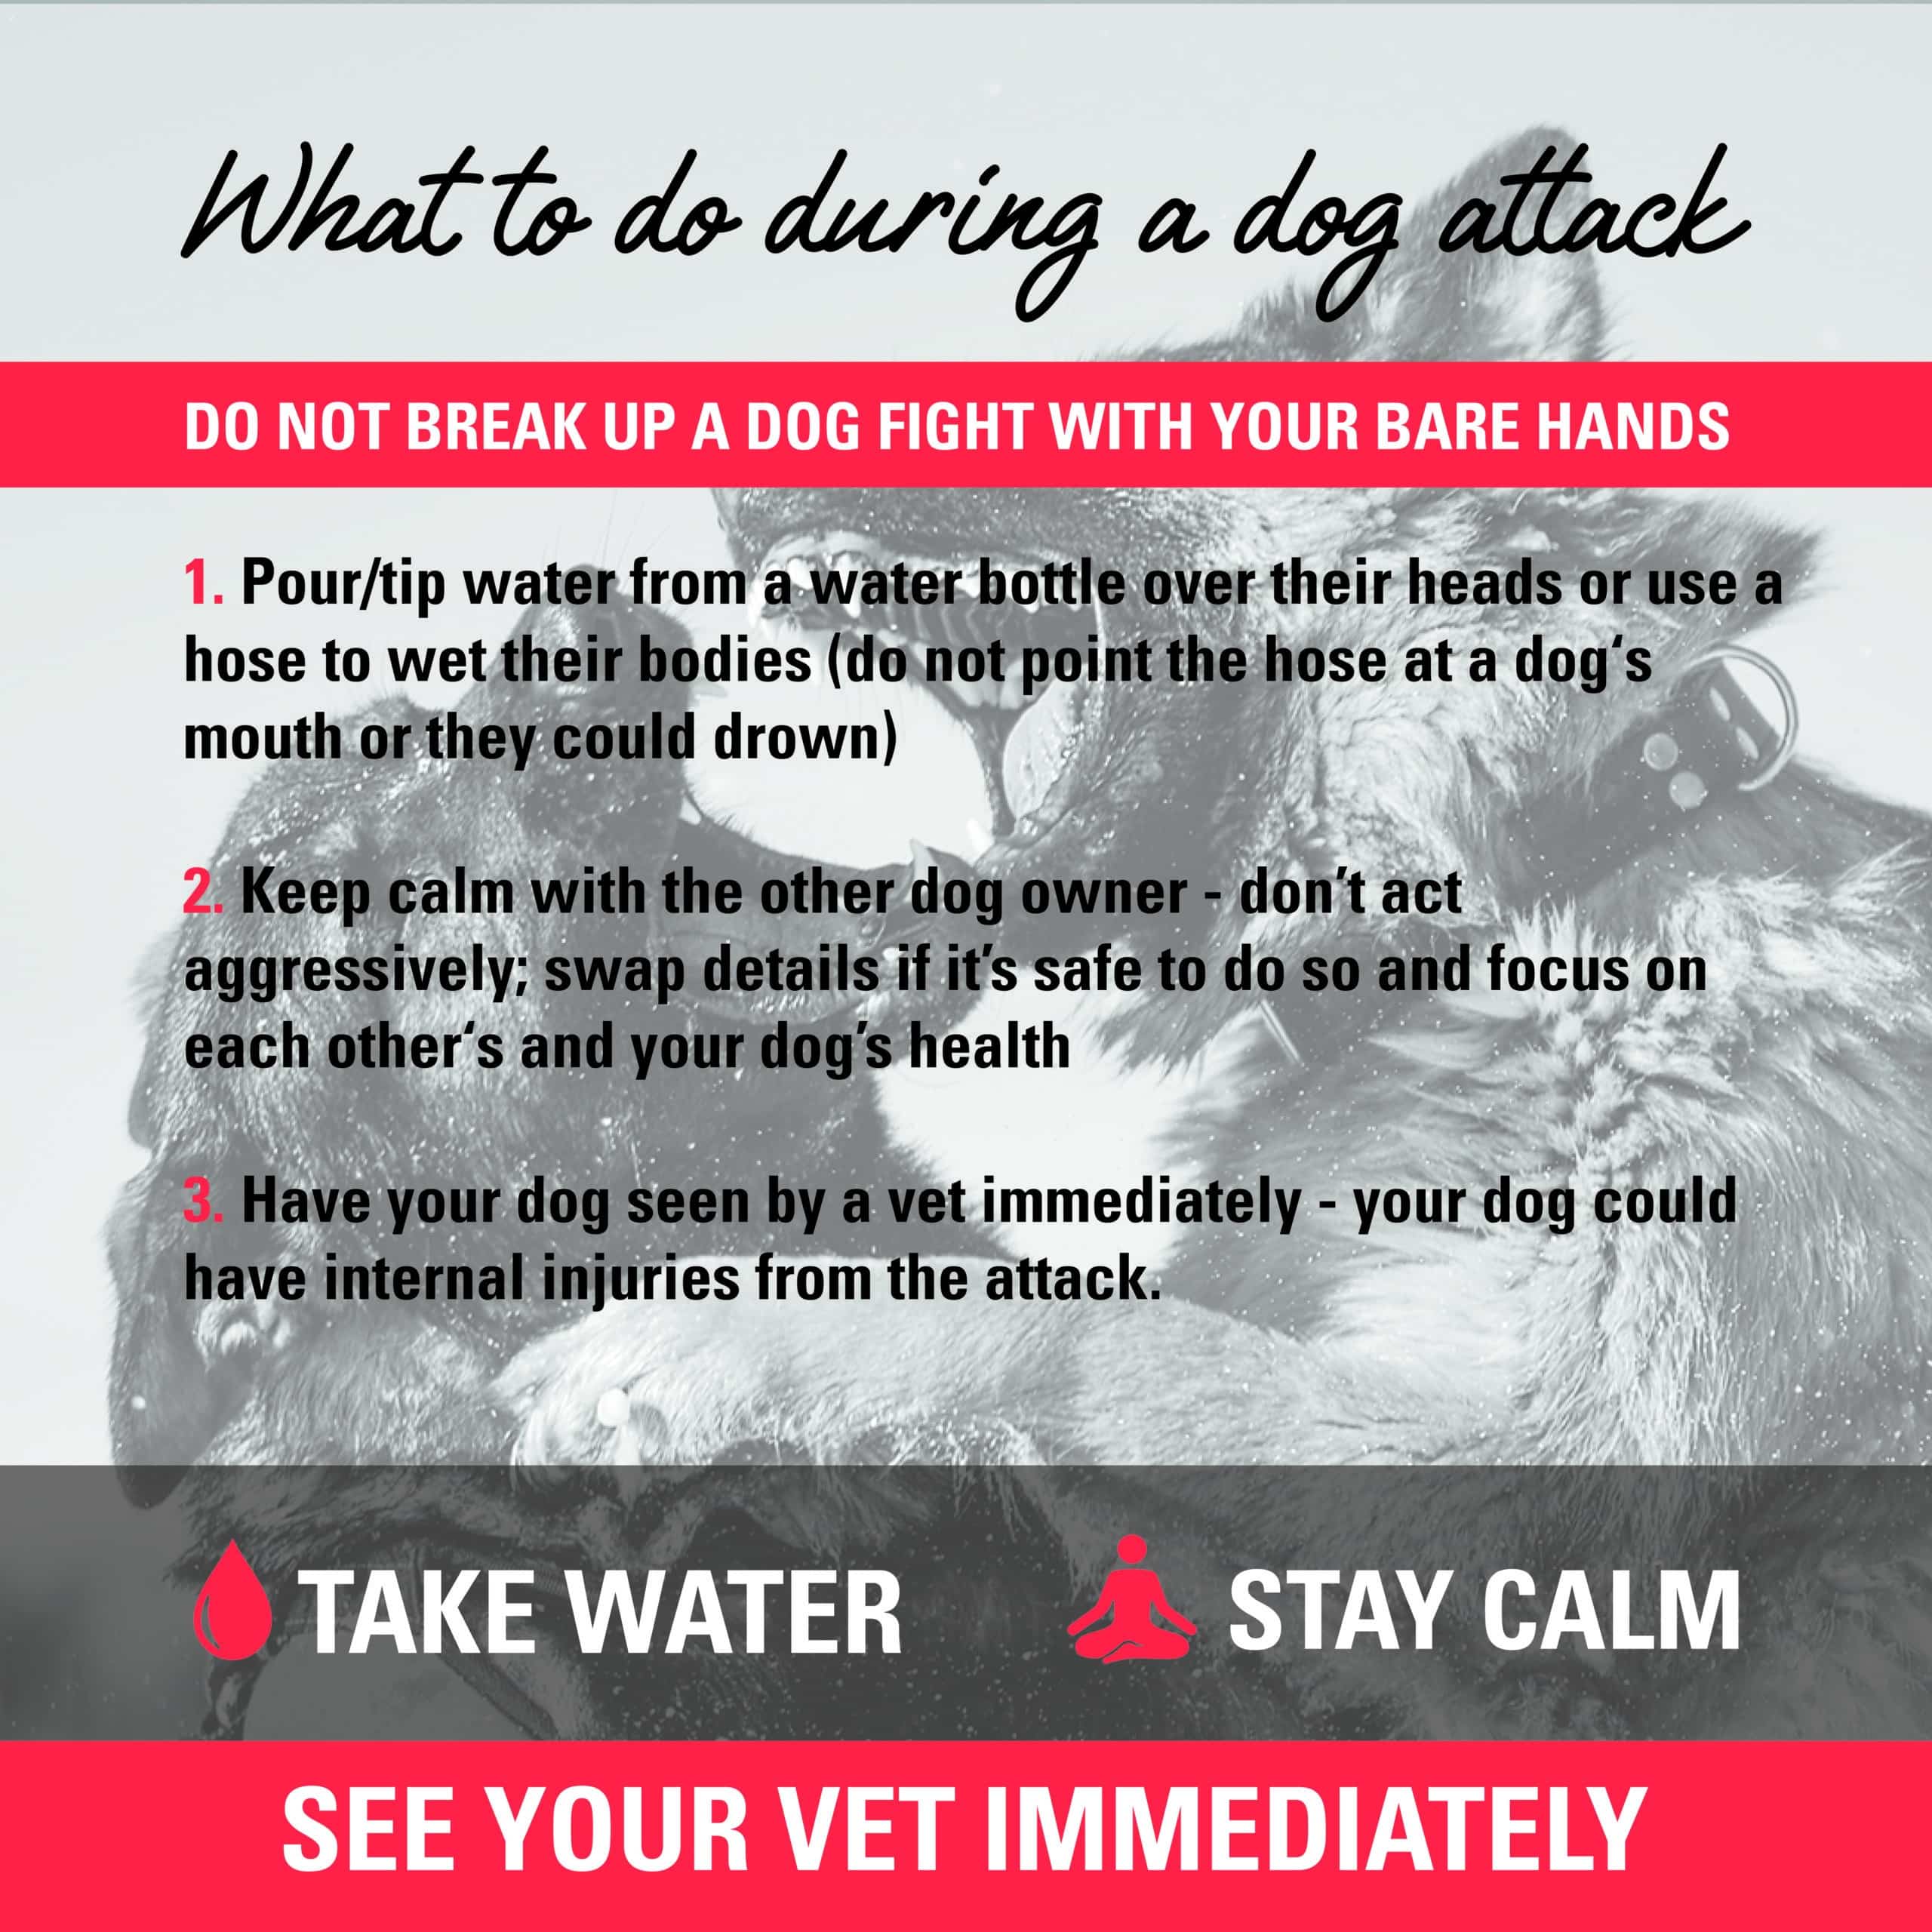 What to do during a dog attack